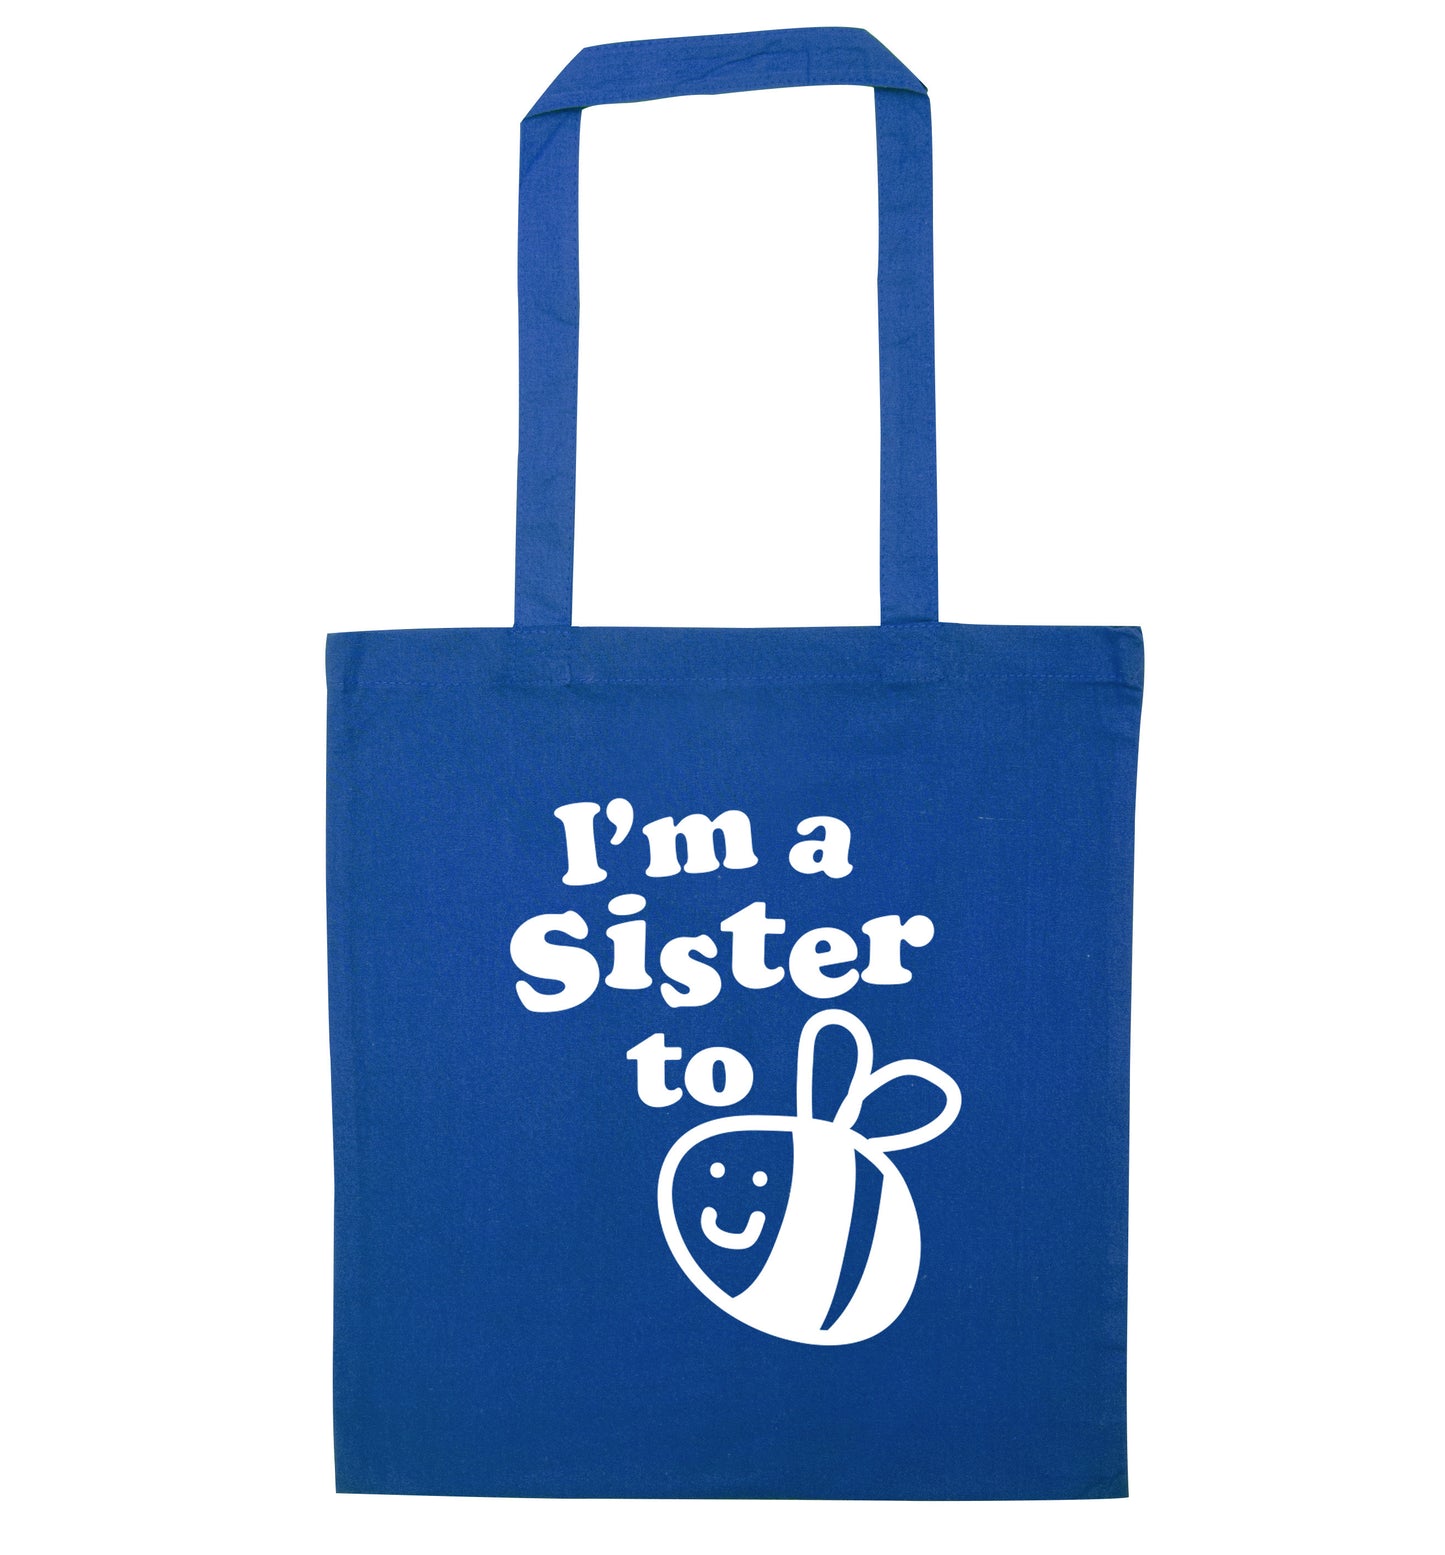 I'm a sister to be blue tote bag